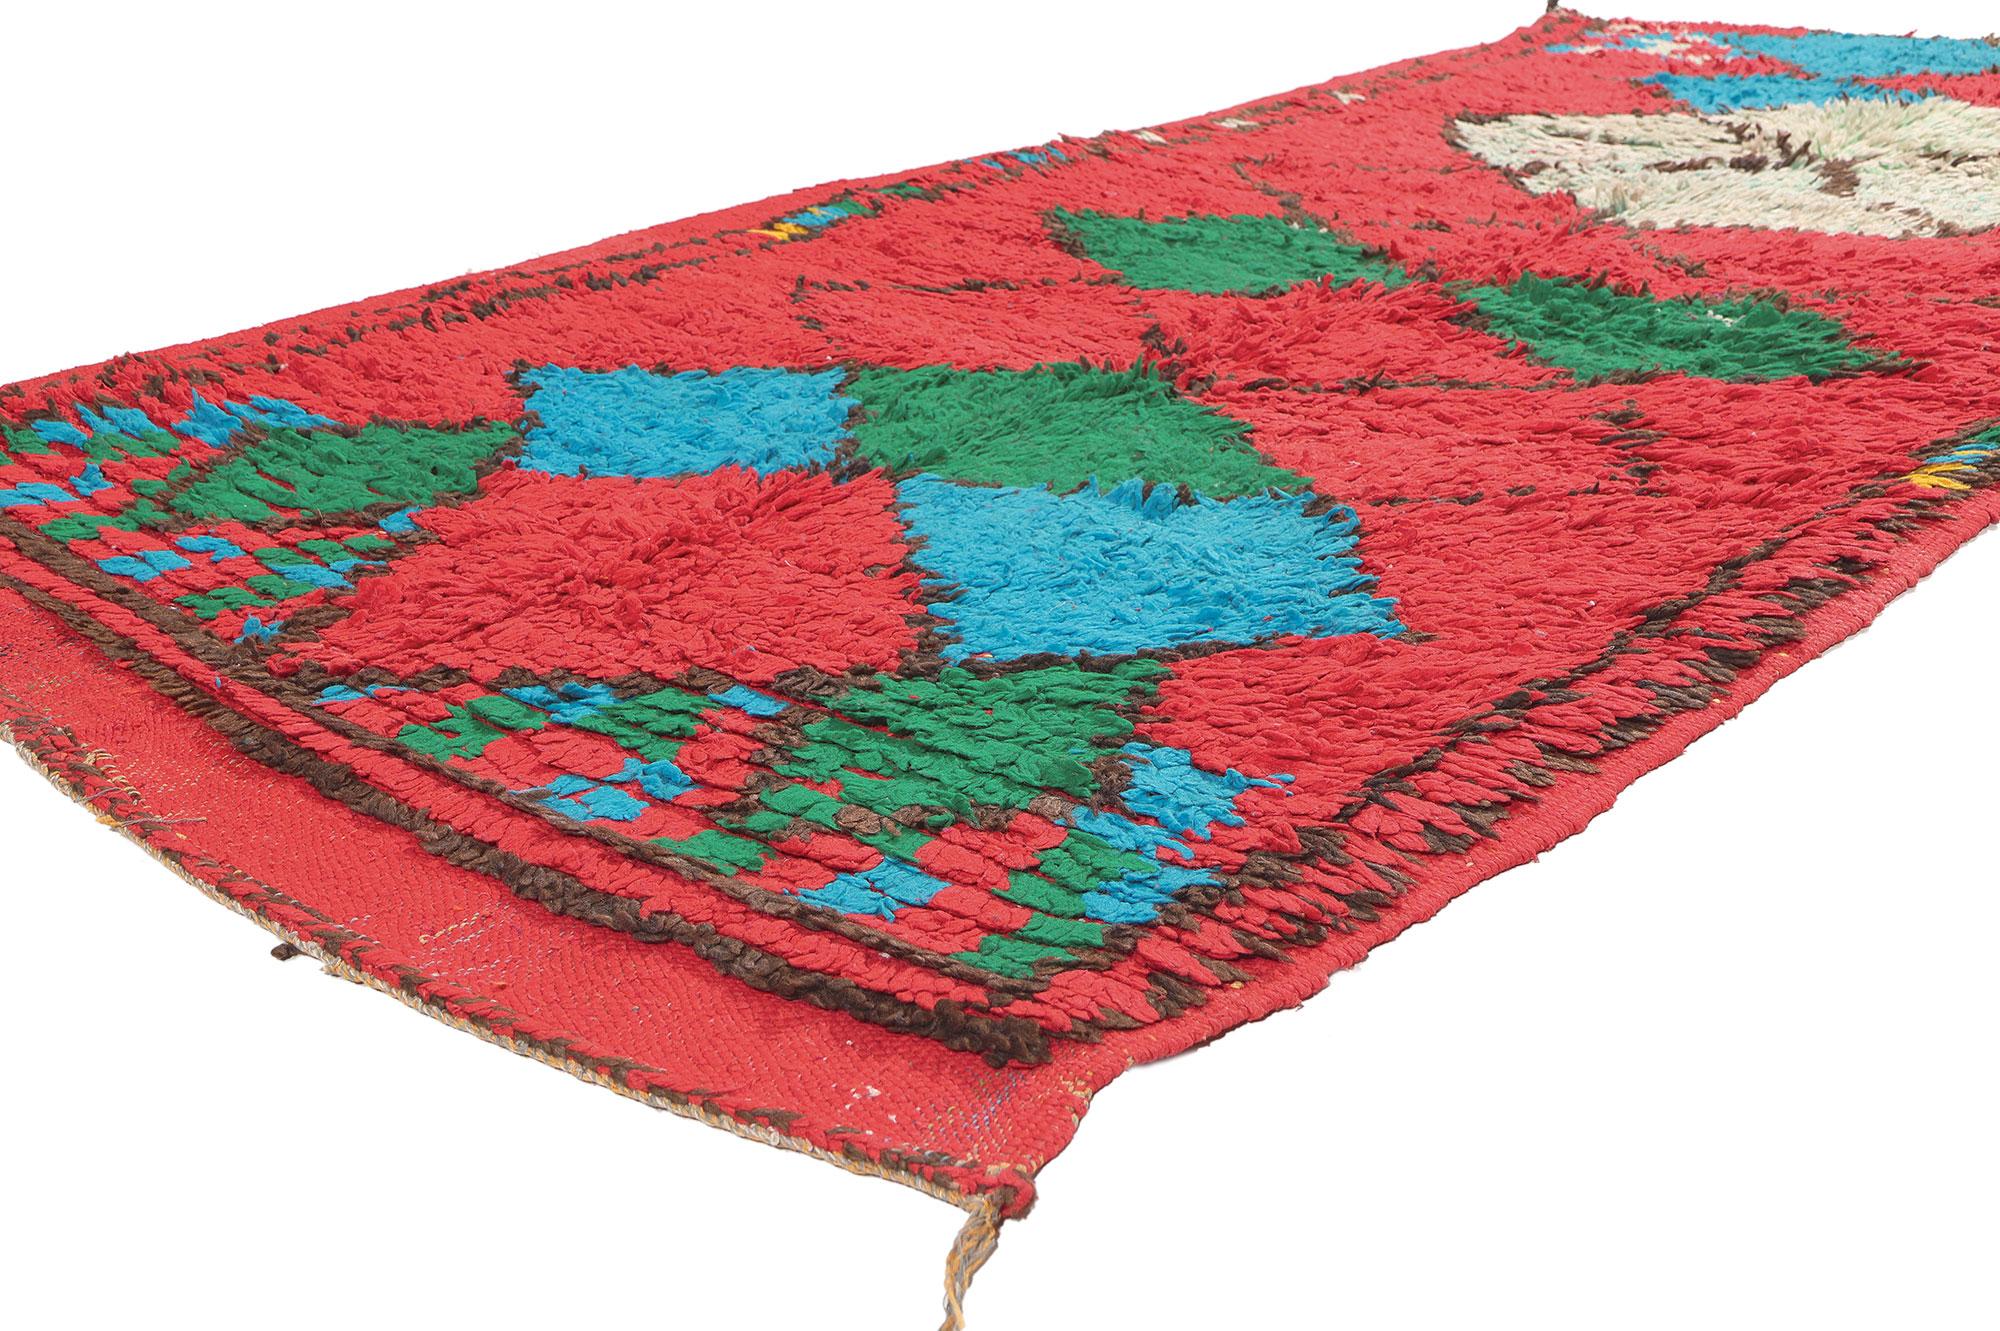 20029 Vintage Red Boujad Moroccan Rug, 04'00 x 08'02. Cozy nomad meets tribal style in this hand knotted wool vintage Moroccan rug. The intrinsic diamond design and energetic color palette woven into this piece work together delivering free-spirited